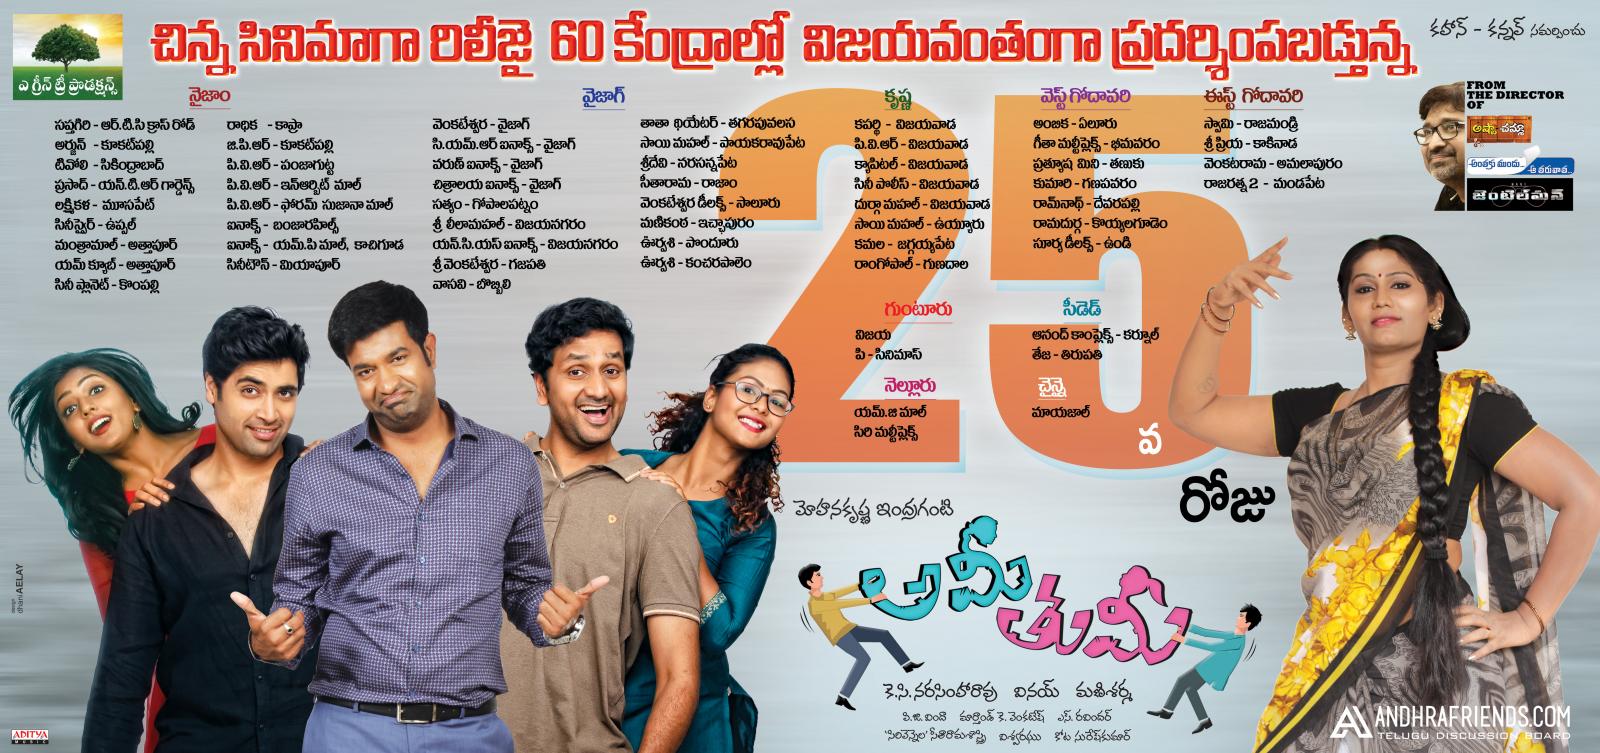 Ami Thumi Movie 25th Day Poster